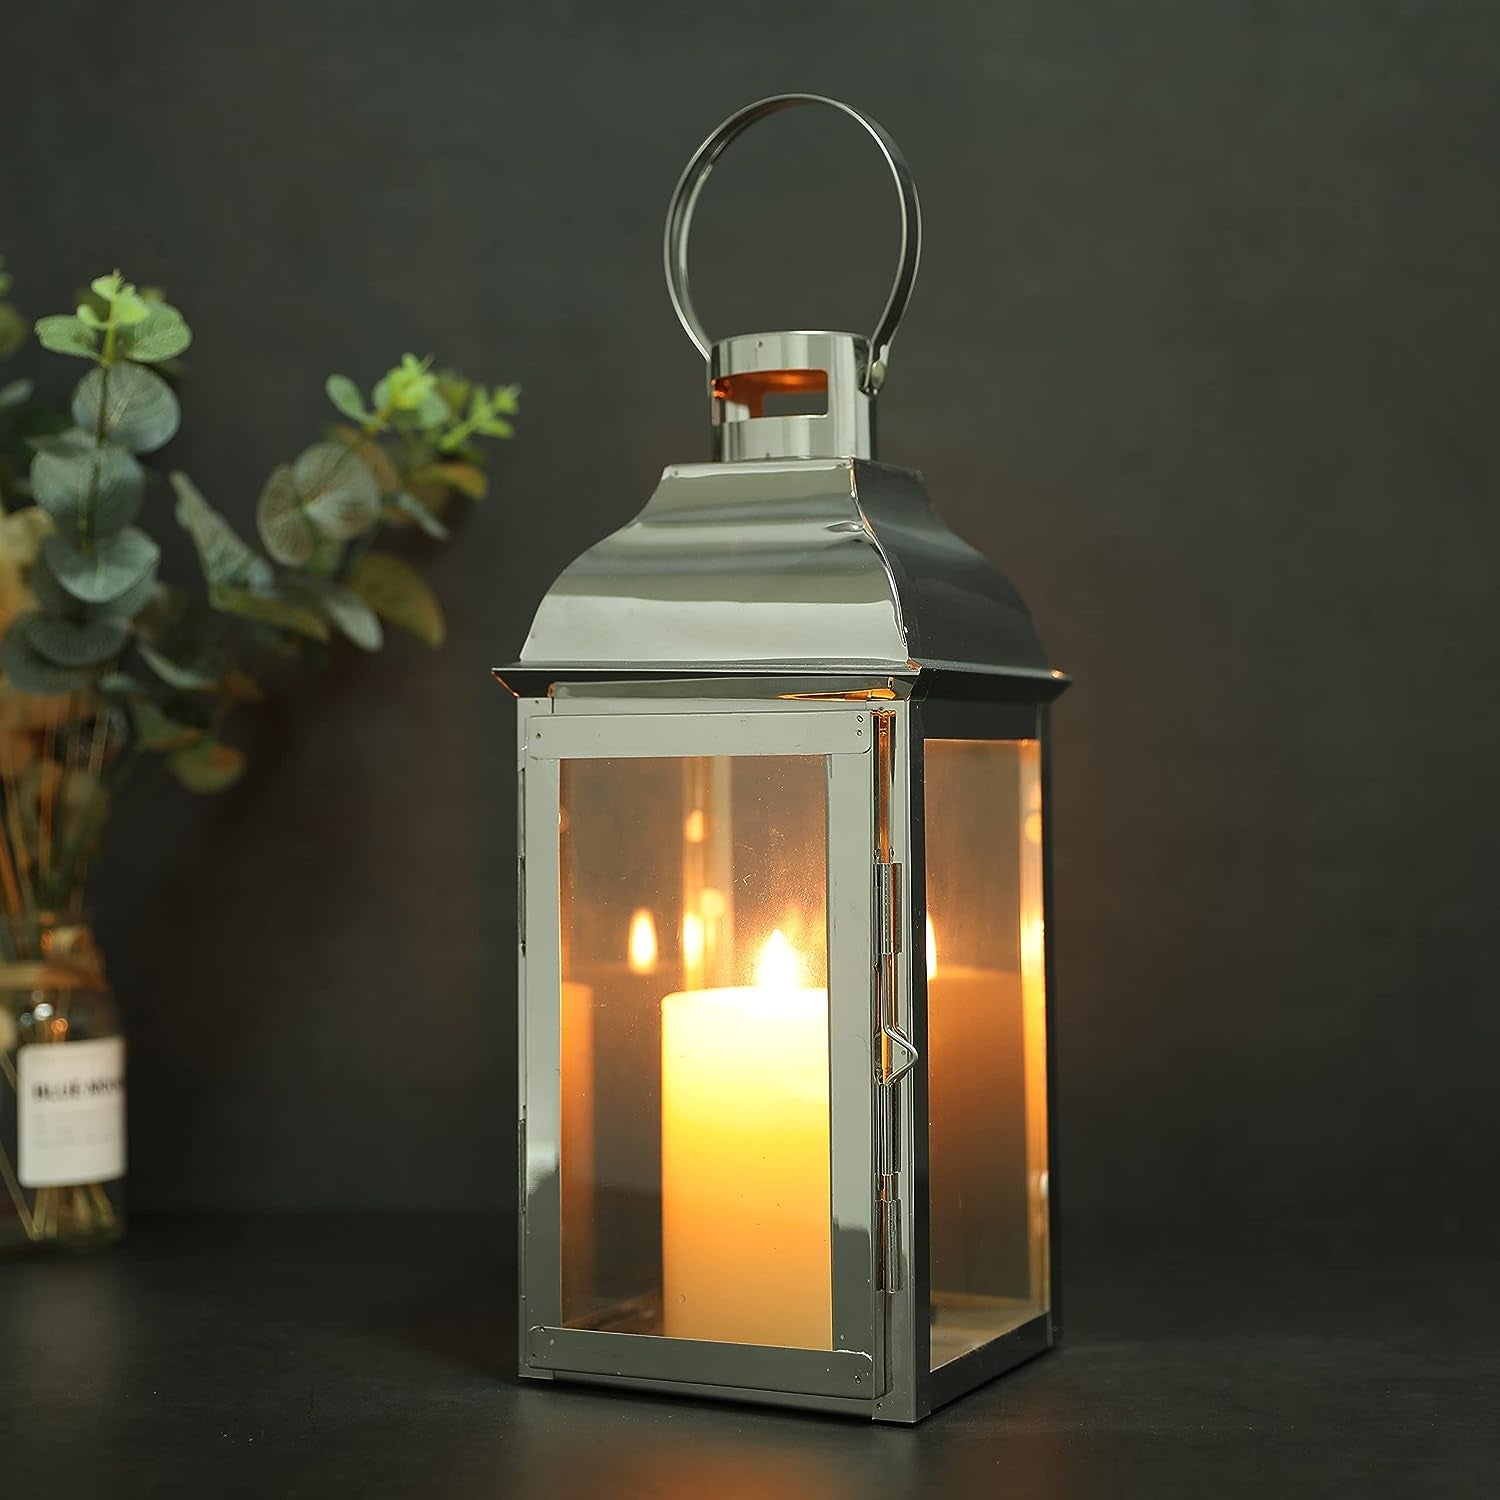 Silver Decorative Lanterns 12.5''High Stainless Steel Candle Lanterns with Tempered Glass for Indoor Outdoor Events Parities and Weddings Vintage Style Hanging Lamps